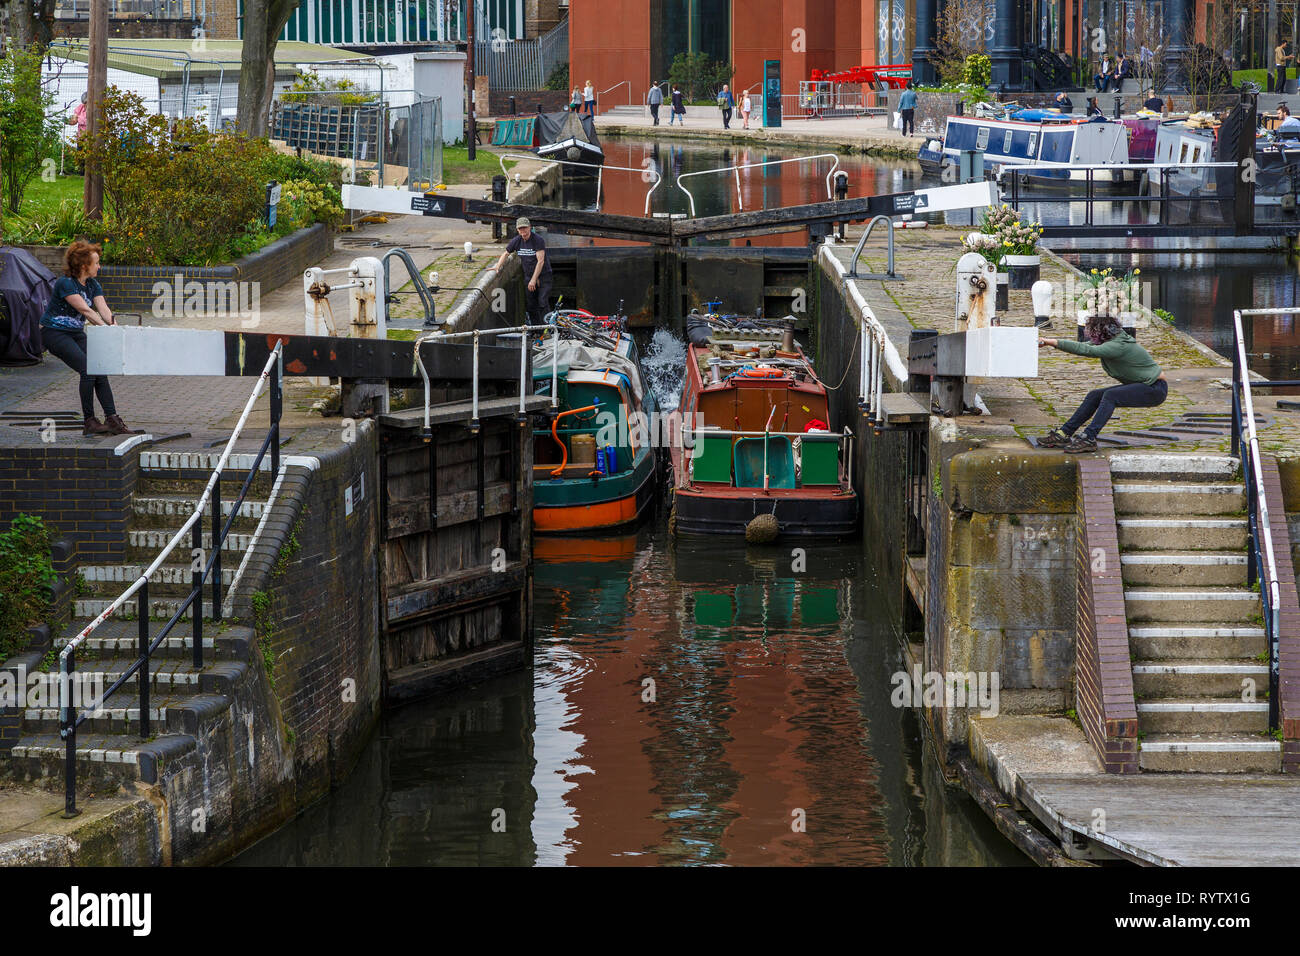 The 1819 St Pancras Lock on the Regent's Canal in London, UK.Popular destination for tourists. Stock Photo